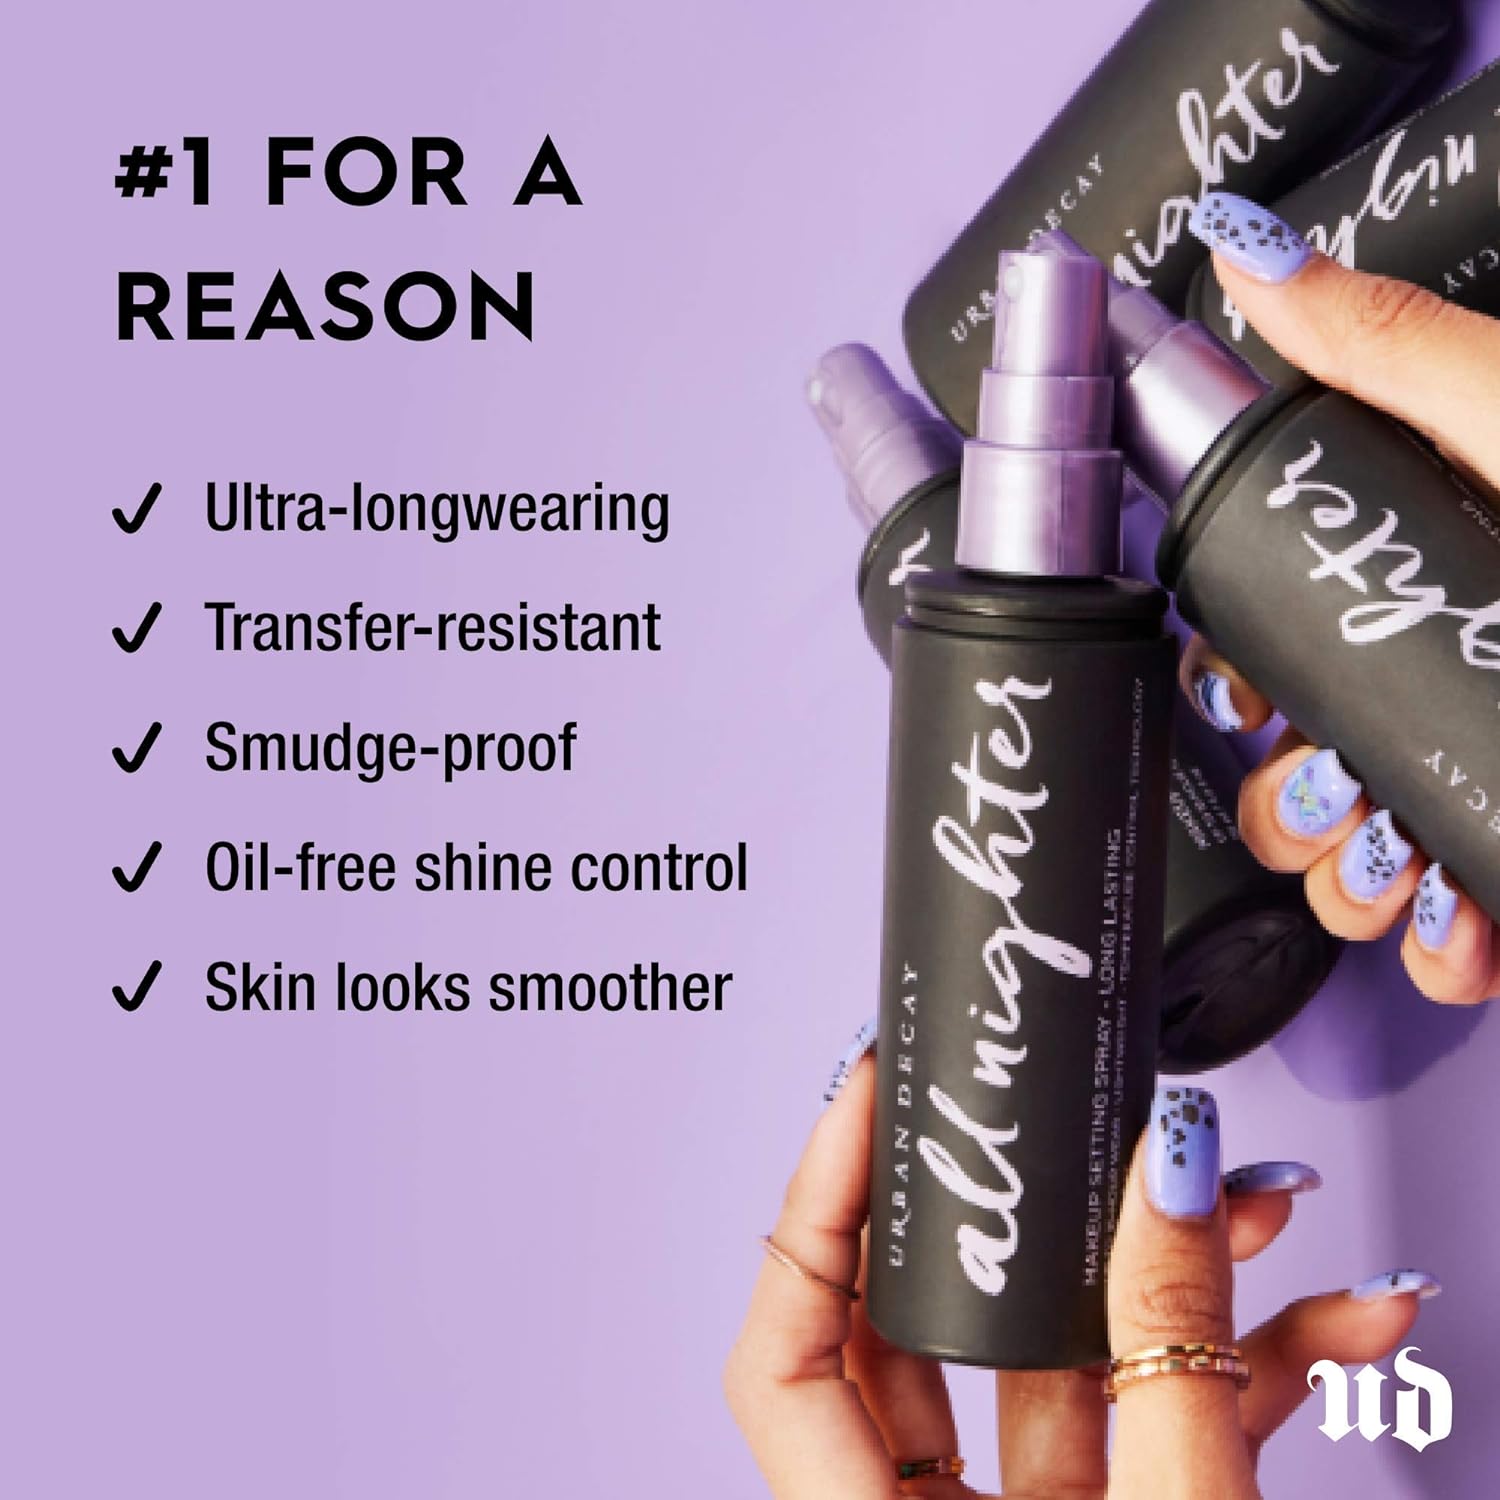  Urban Decay All Nighter Long-Lasting Makeup Setting Spray - Award-Winning Makeup Finishing Spray - Lasts Up To 16 Hours - Oil-Free, Microfine Mist - Non-Drying Formula for All Skin